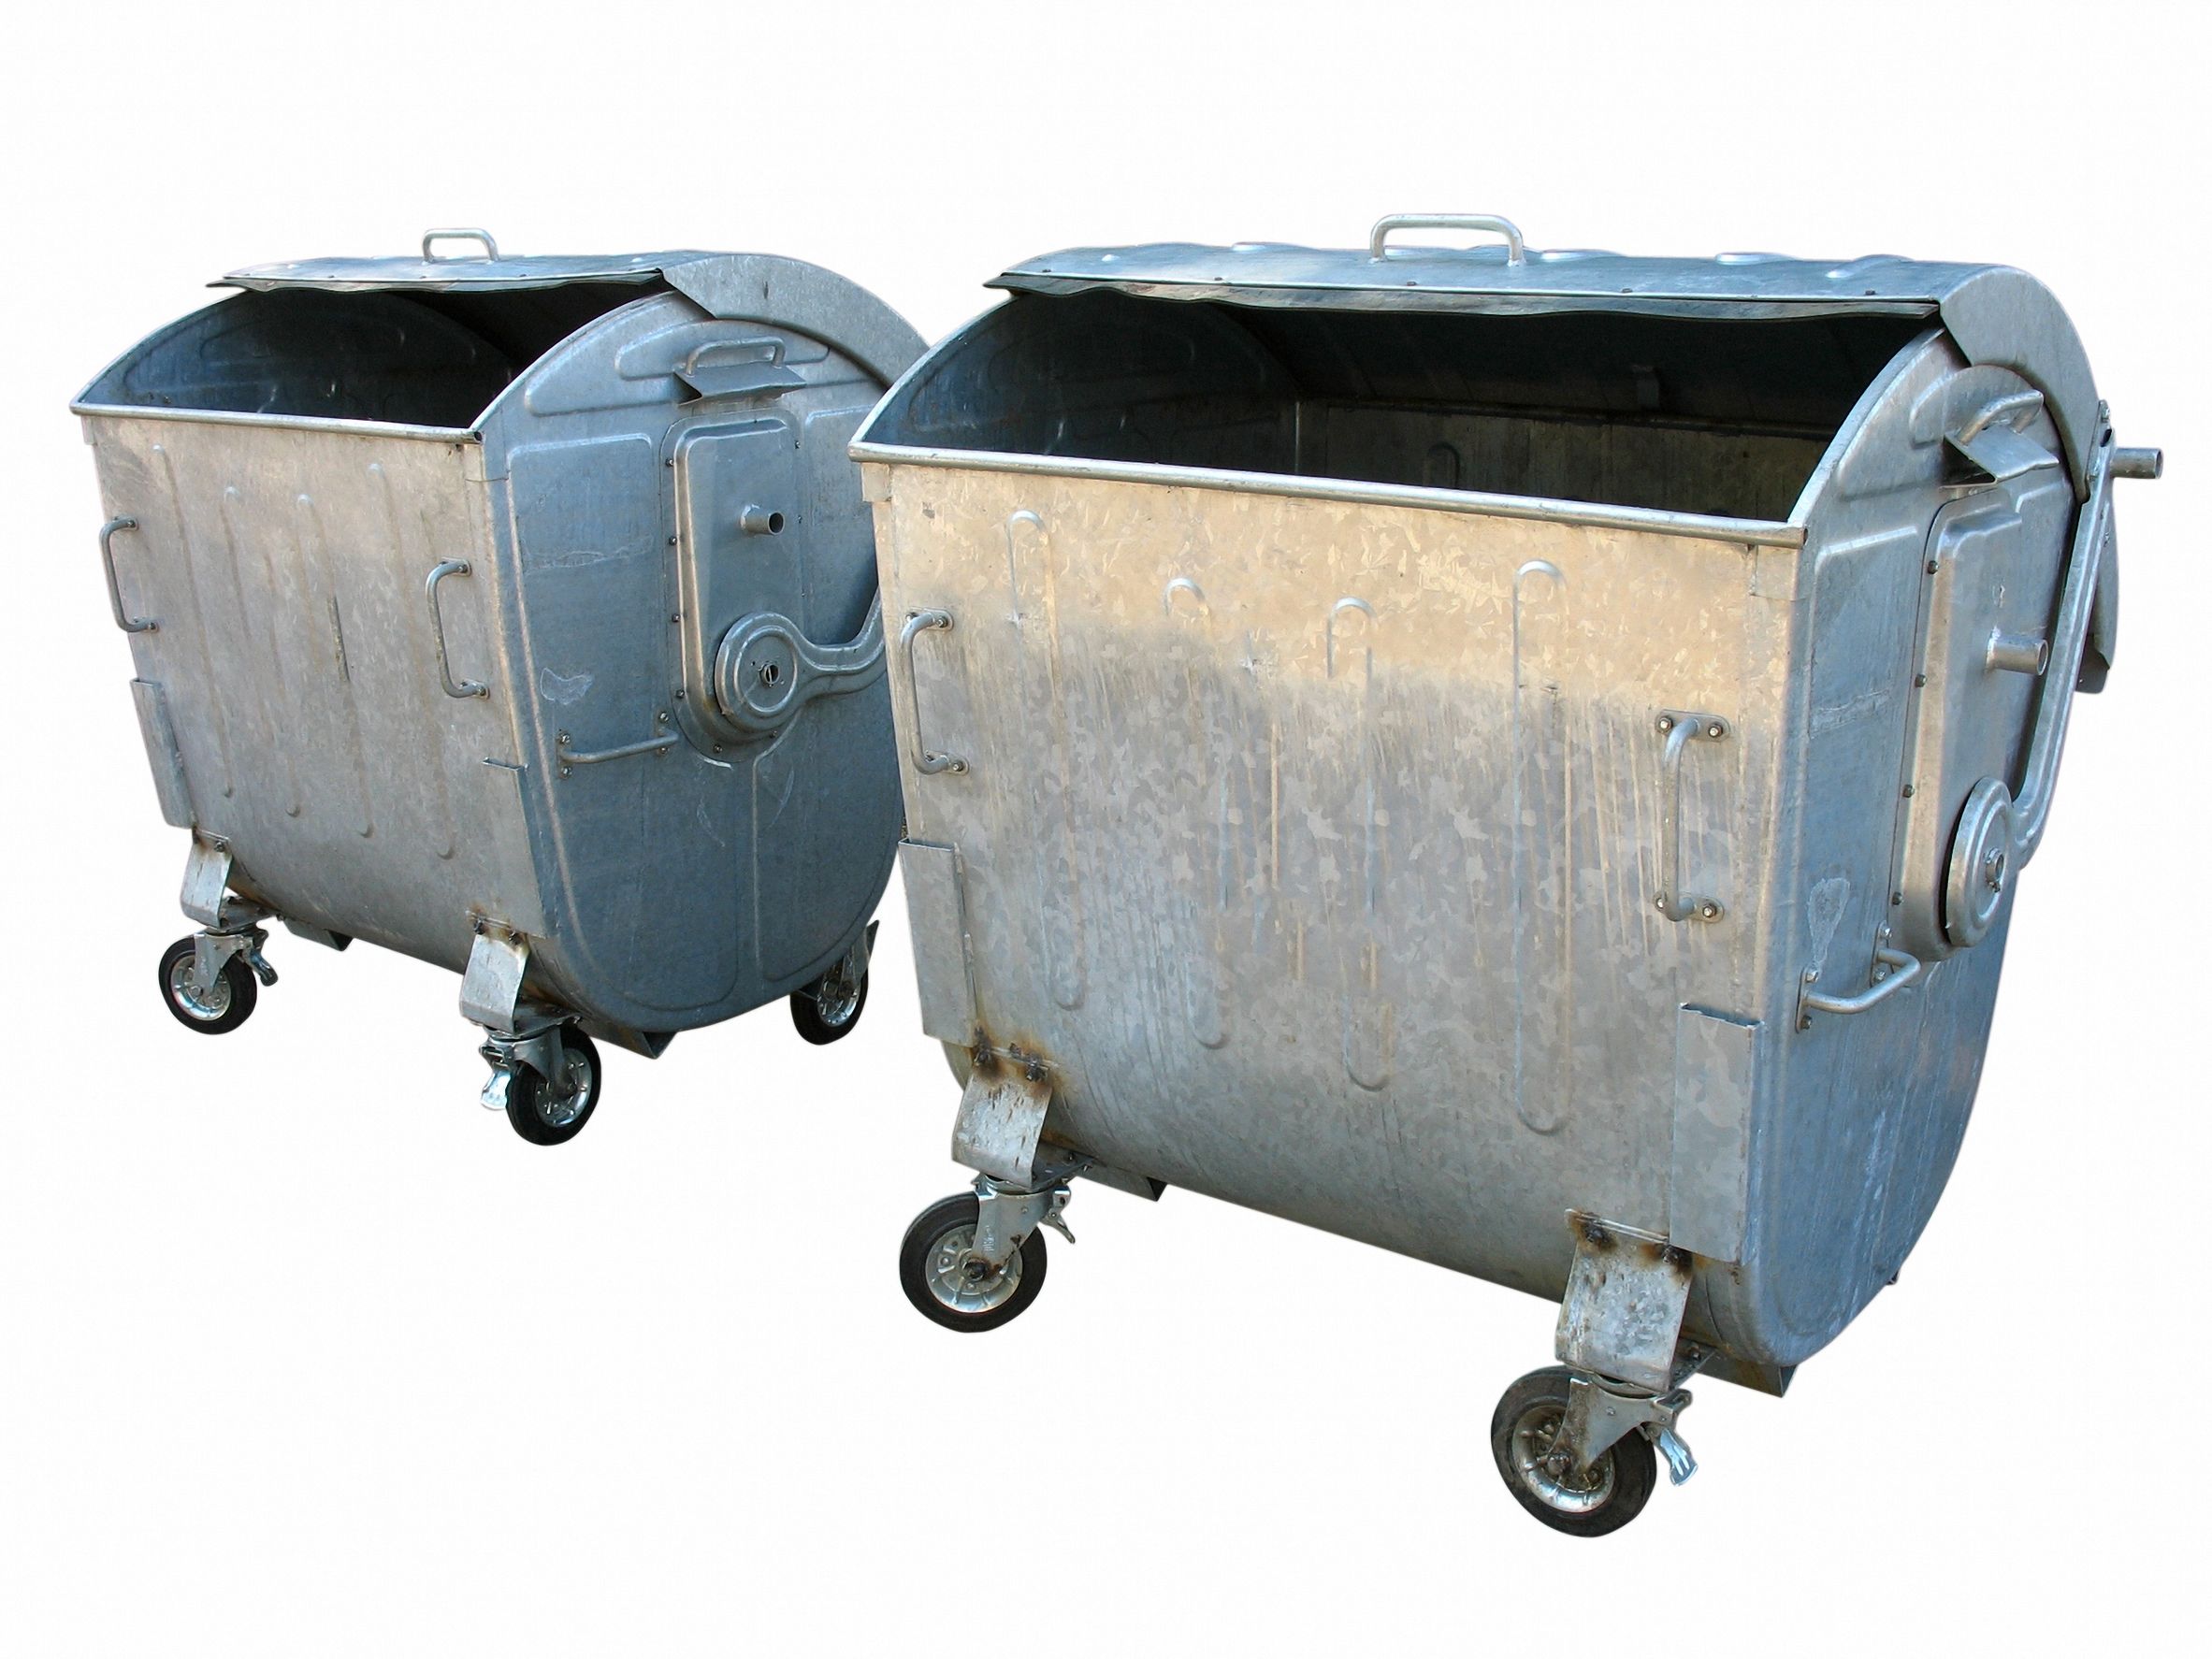 Benefits of Getting a Compactor Rental for Your Business